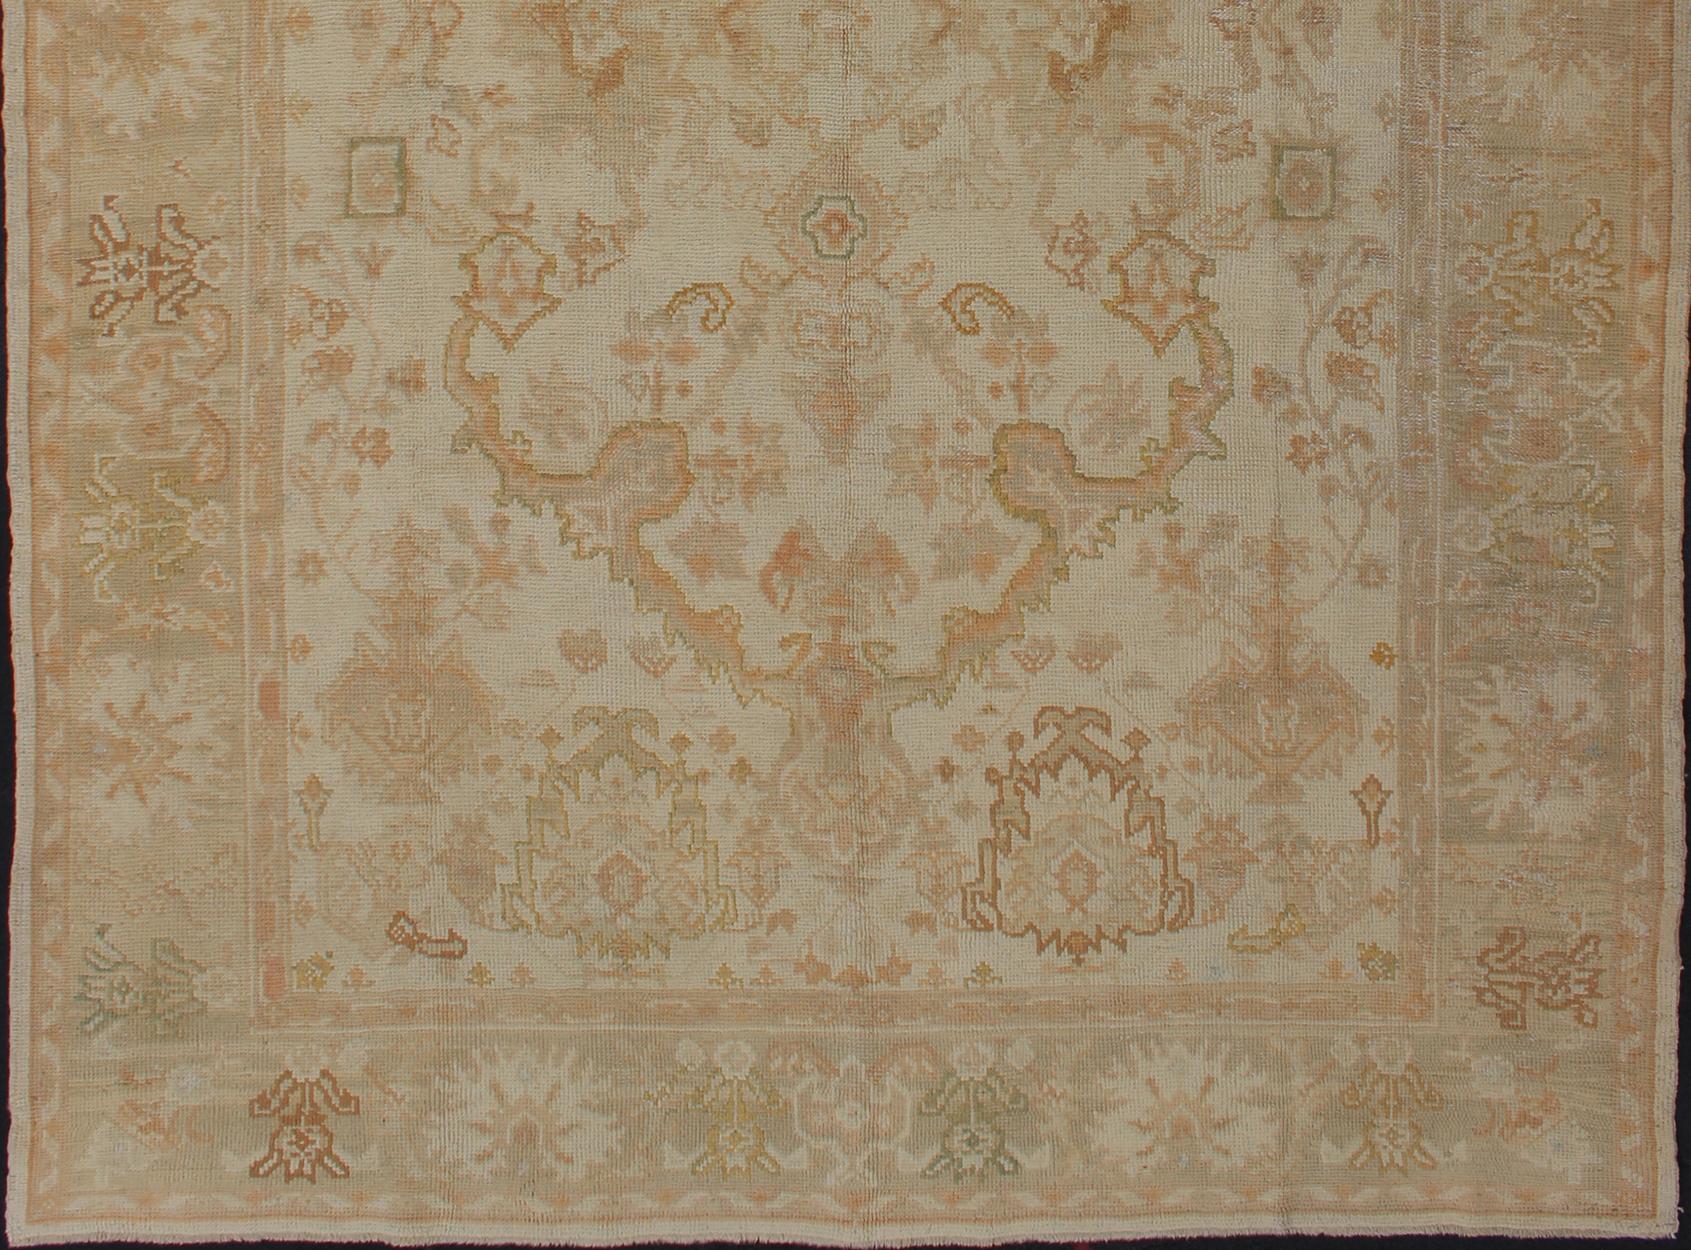 Antique Oushak rug in taupe, beige, green copper, peach, muted brown, Keivan Woven Arts / rug / I-1003. Antique Oushak rug

Measures: 8'3 x 12'10.

This antique Oushak rug bears unmistakably refined beauty due to its highly sophisticated palette of